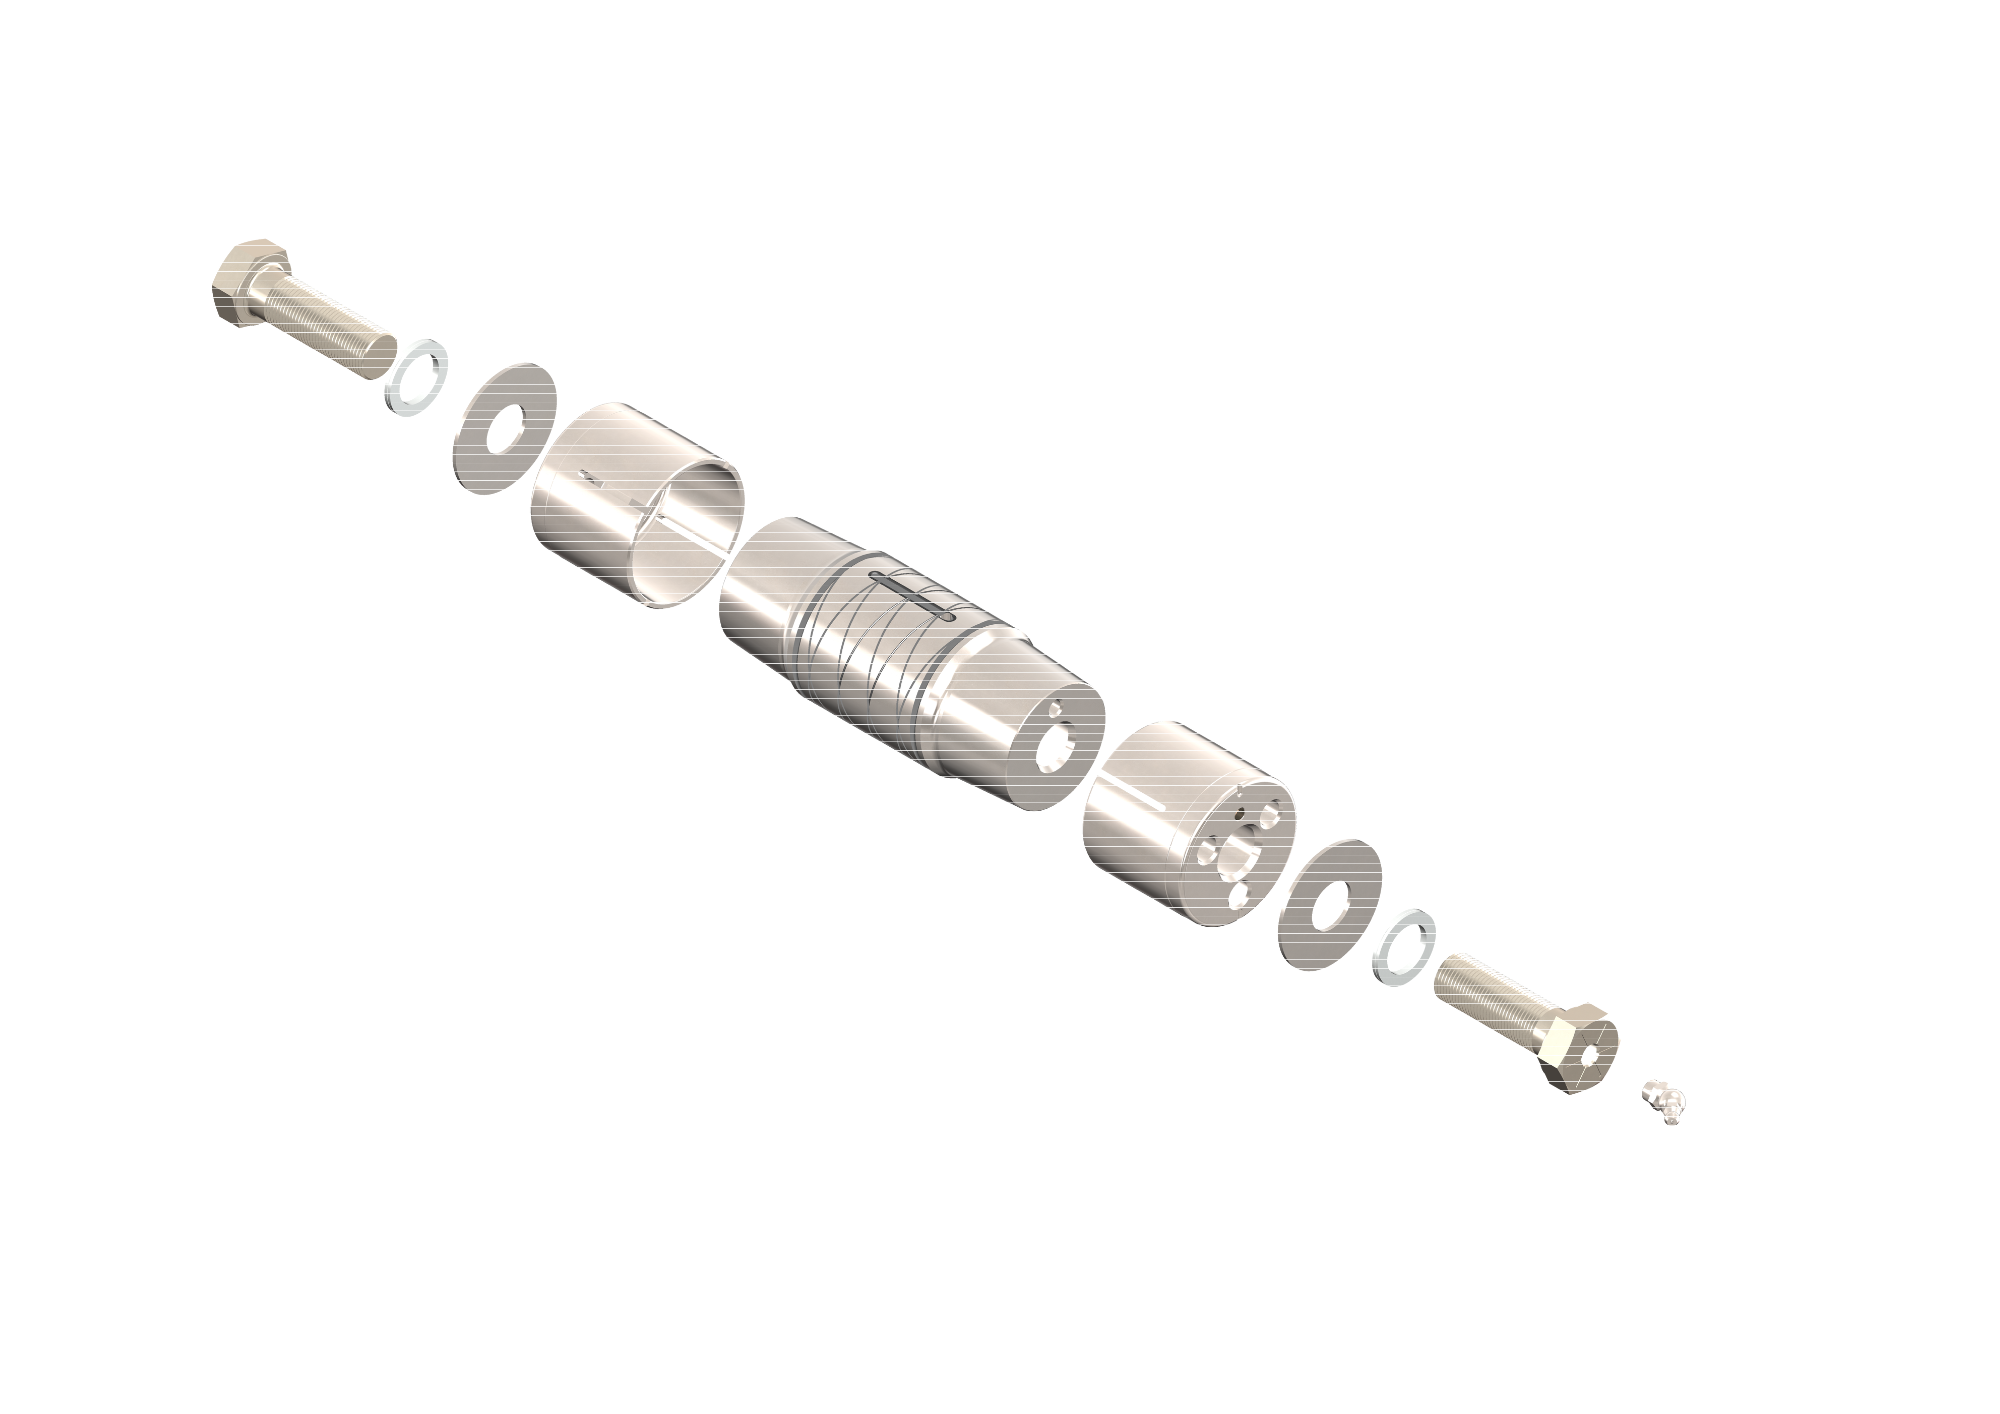 ASSY;PIN:SWAYBAR:COLLET GREASED MOD2: EP